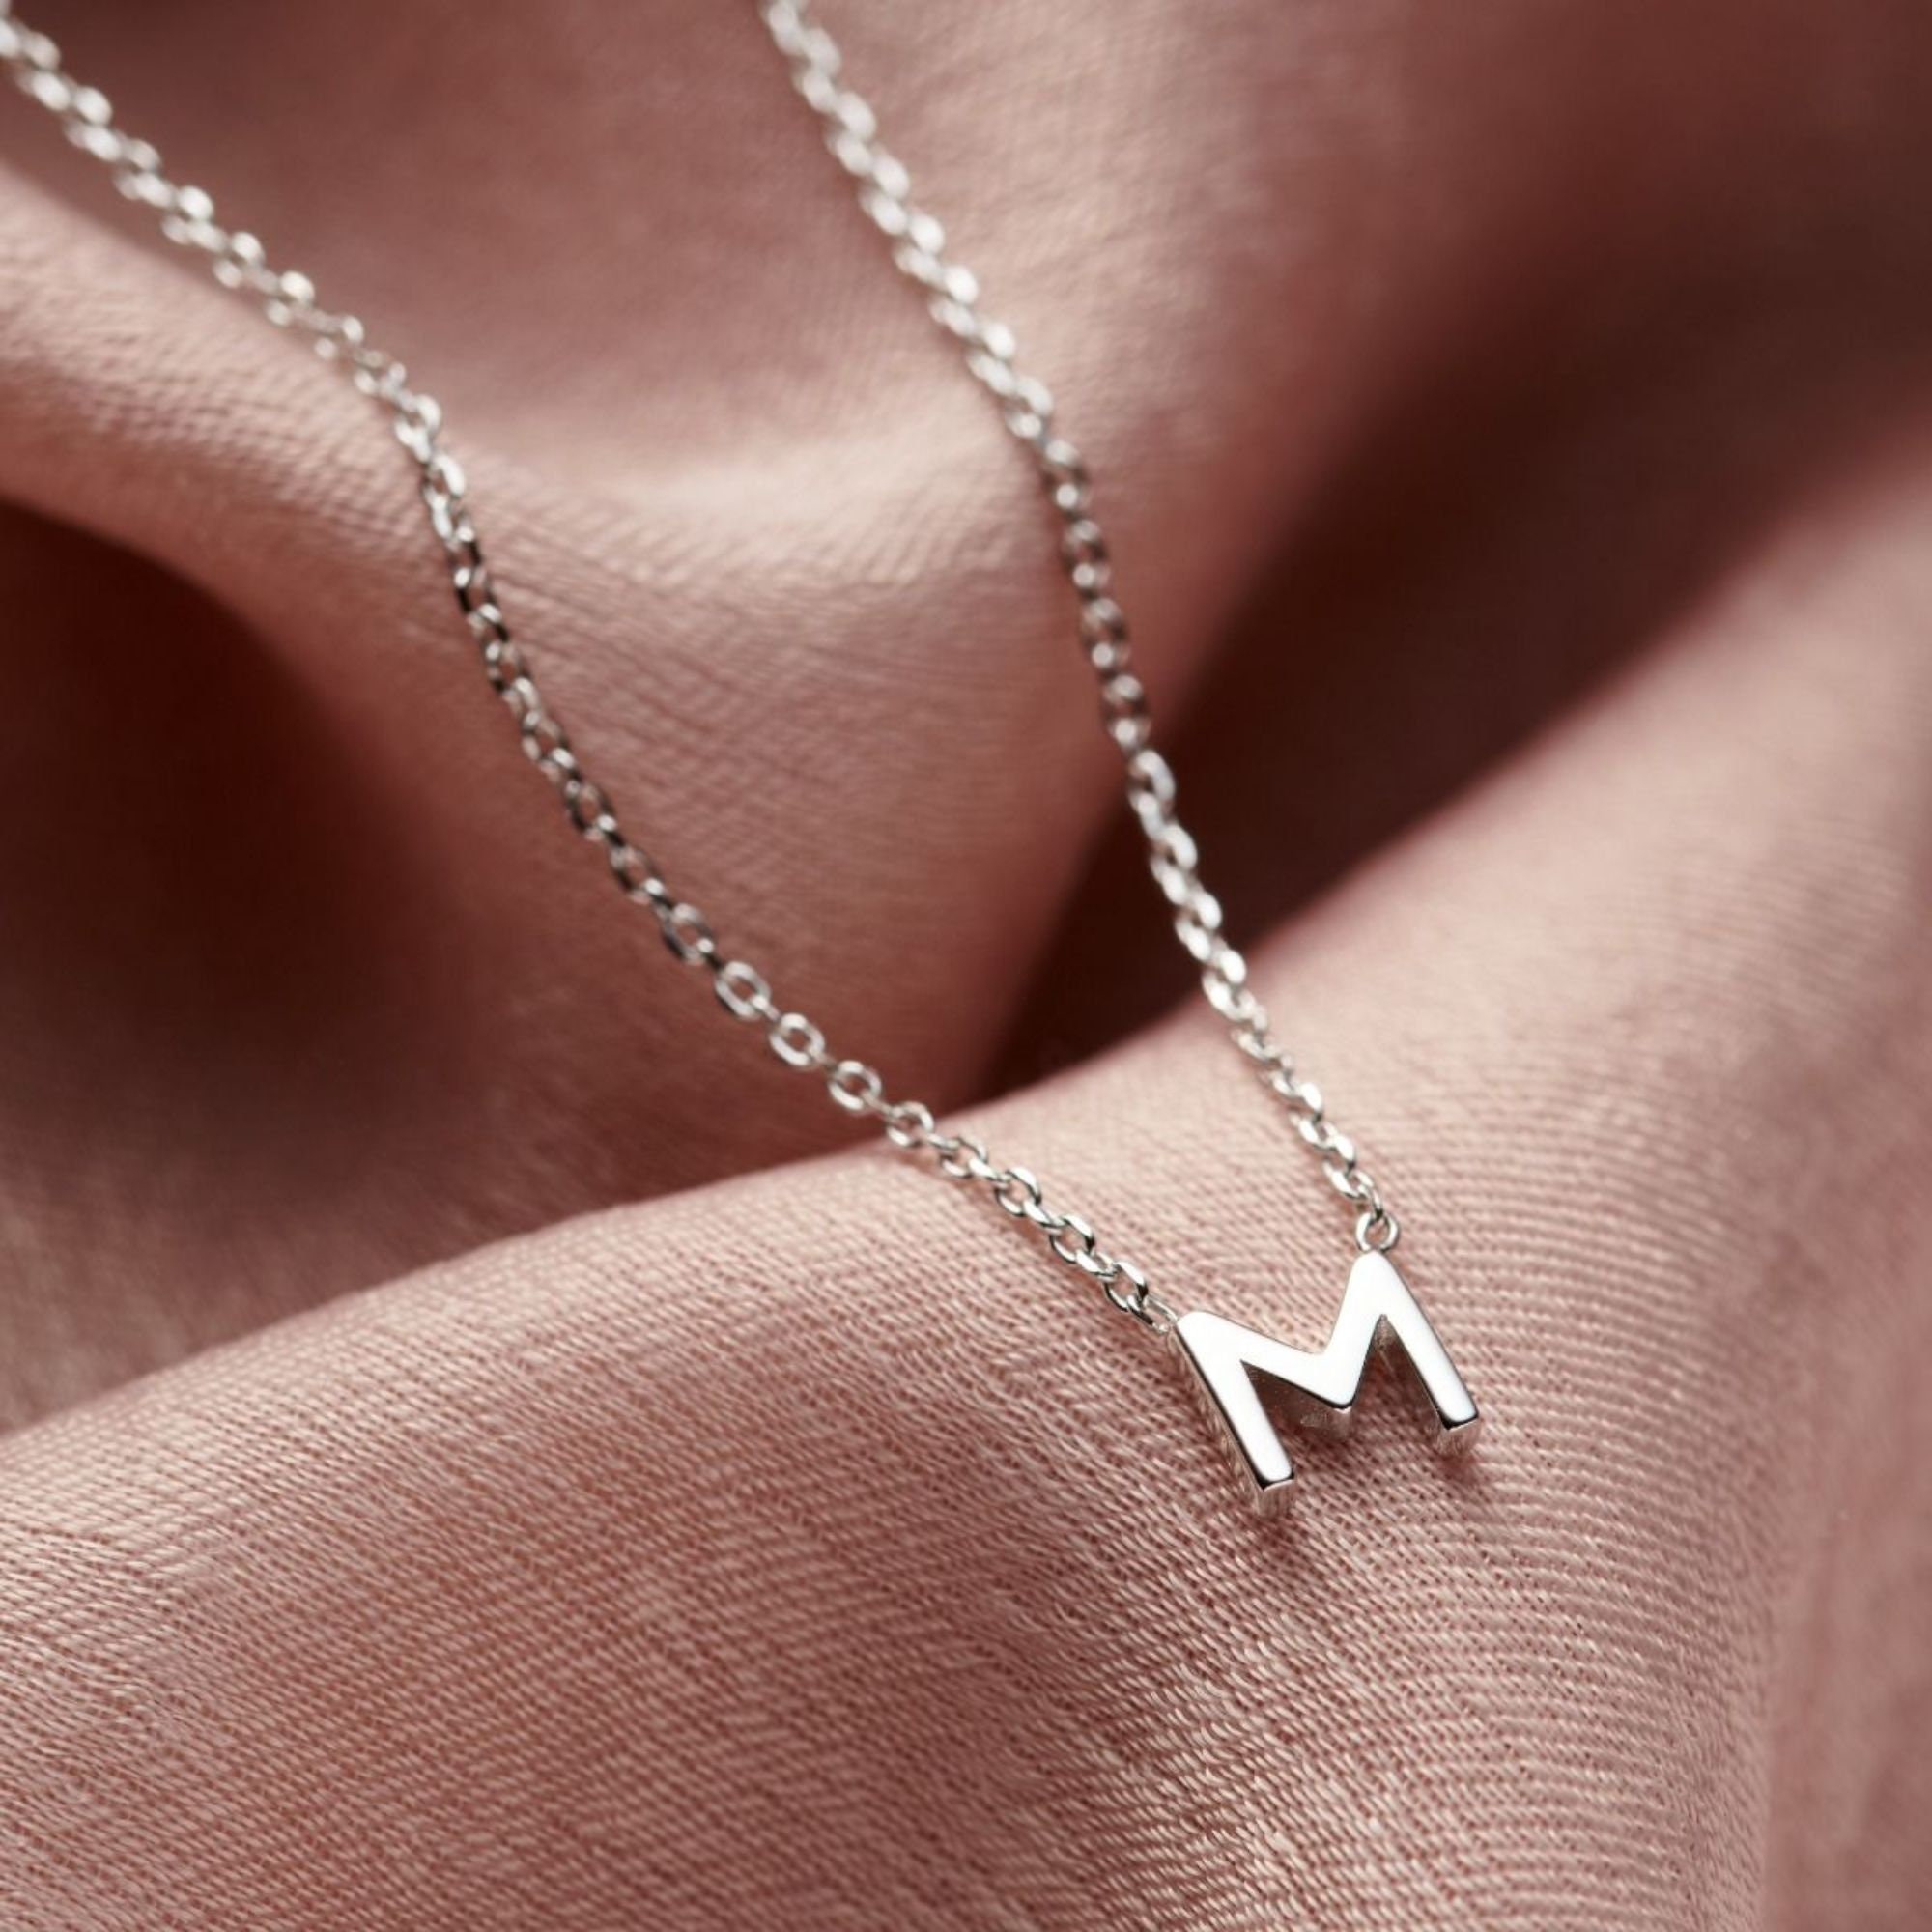 Men's Silver Initial Necklace By Posh Totty Designs